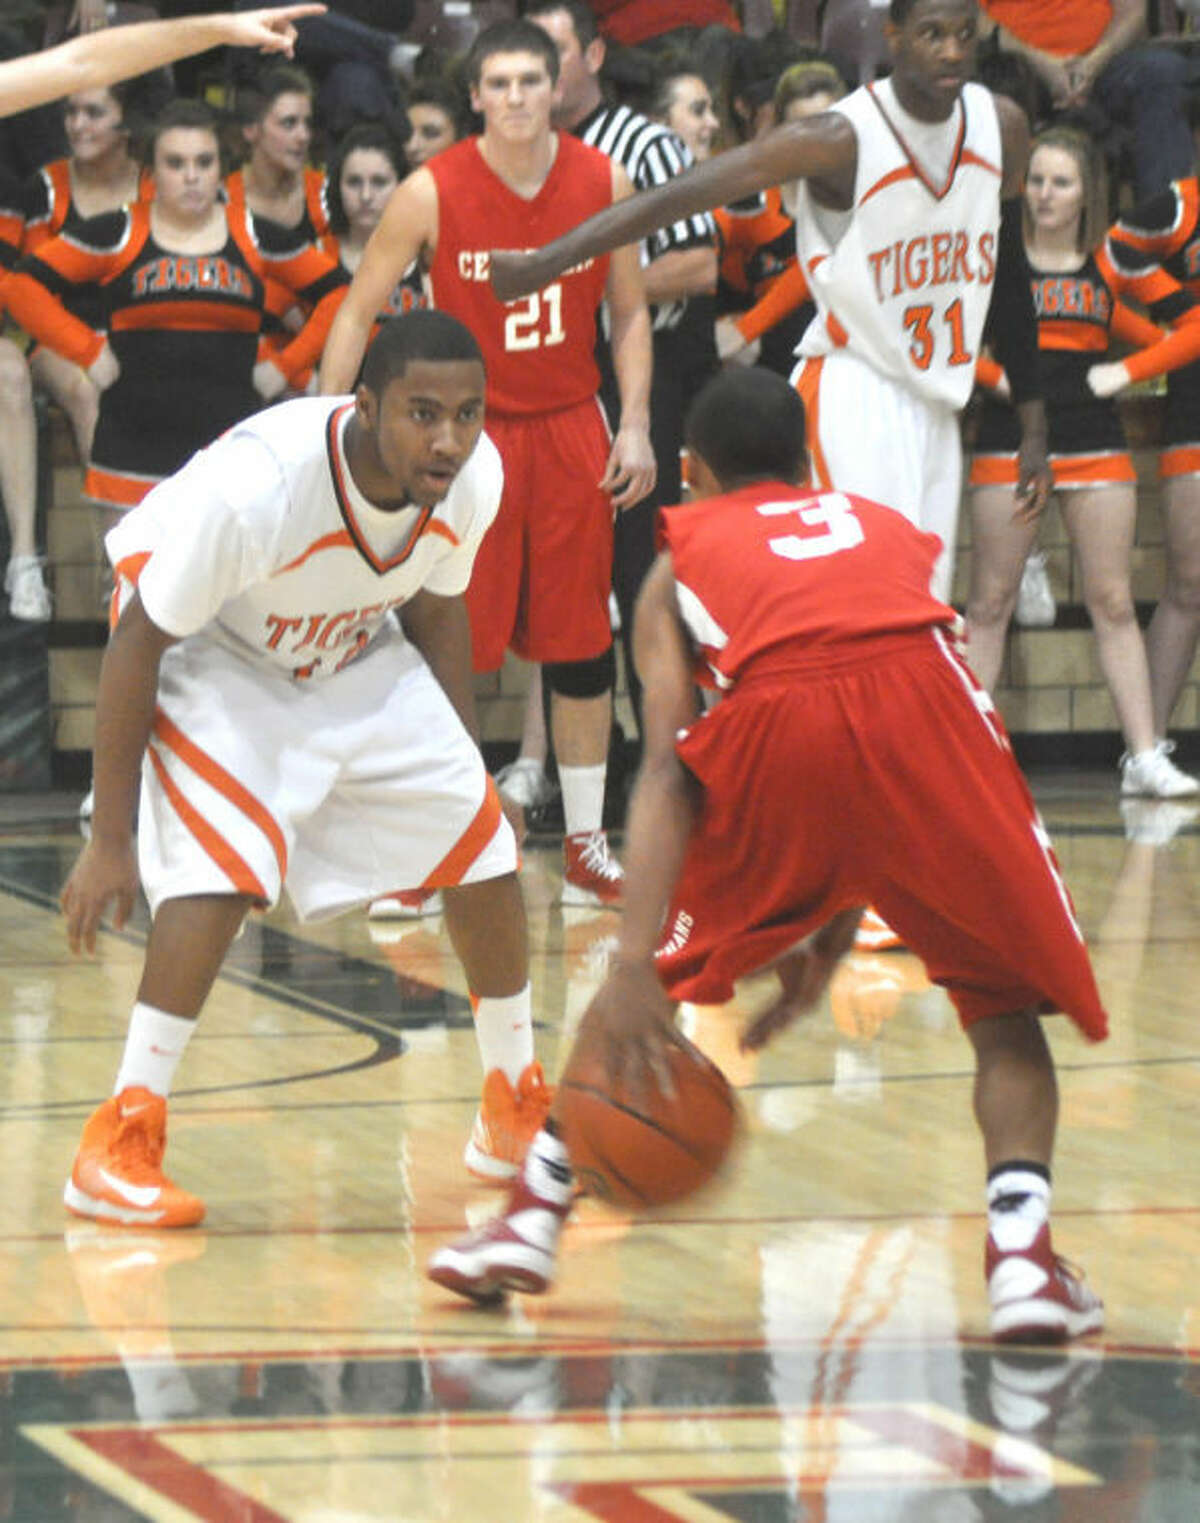 Tiger Darius Crochrell plays defense on D’Aaron Owens of the Orphans on Saturday.